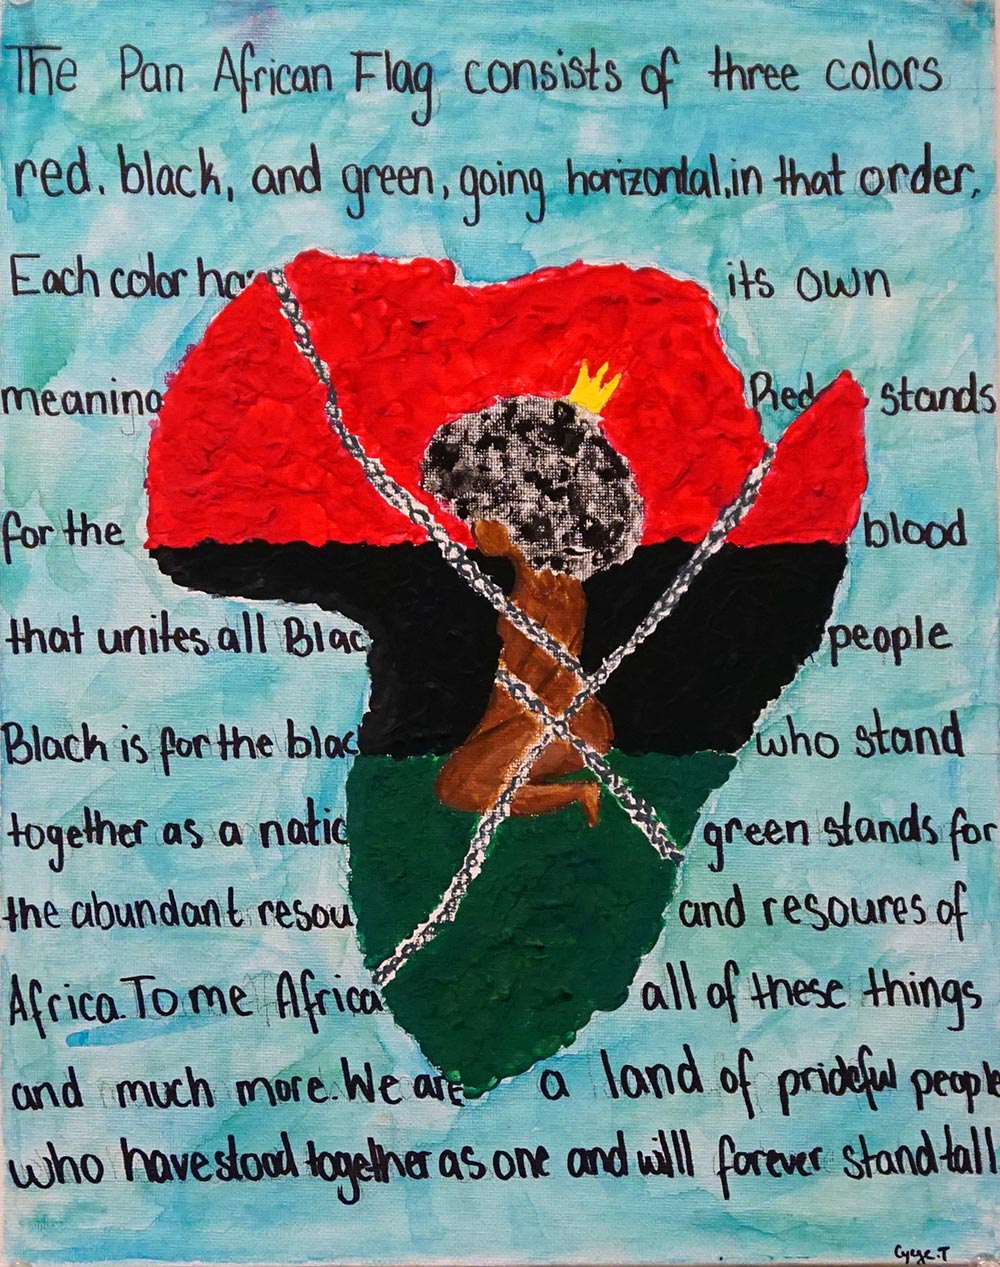 A painting of a person with an afro and crown held by chains within the Pan African flag in the shape of Africa, with text written by hand in the background